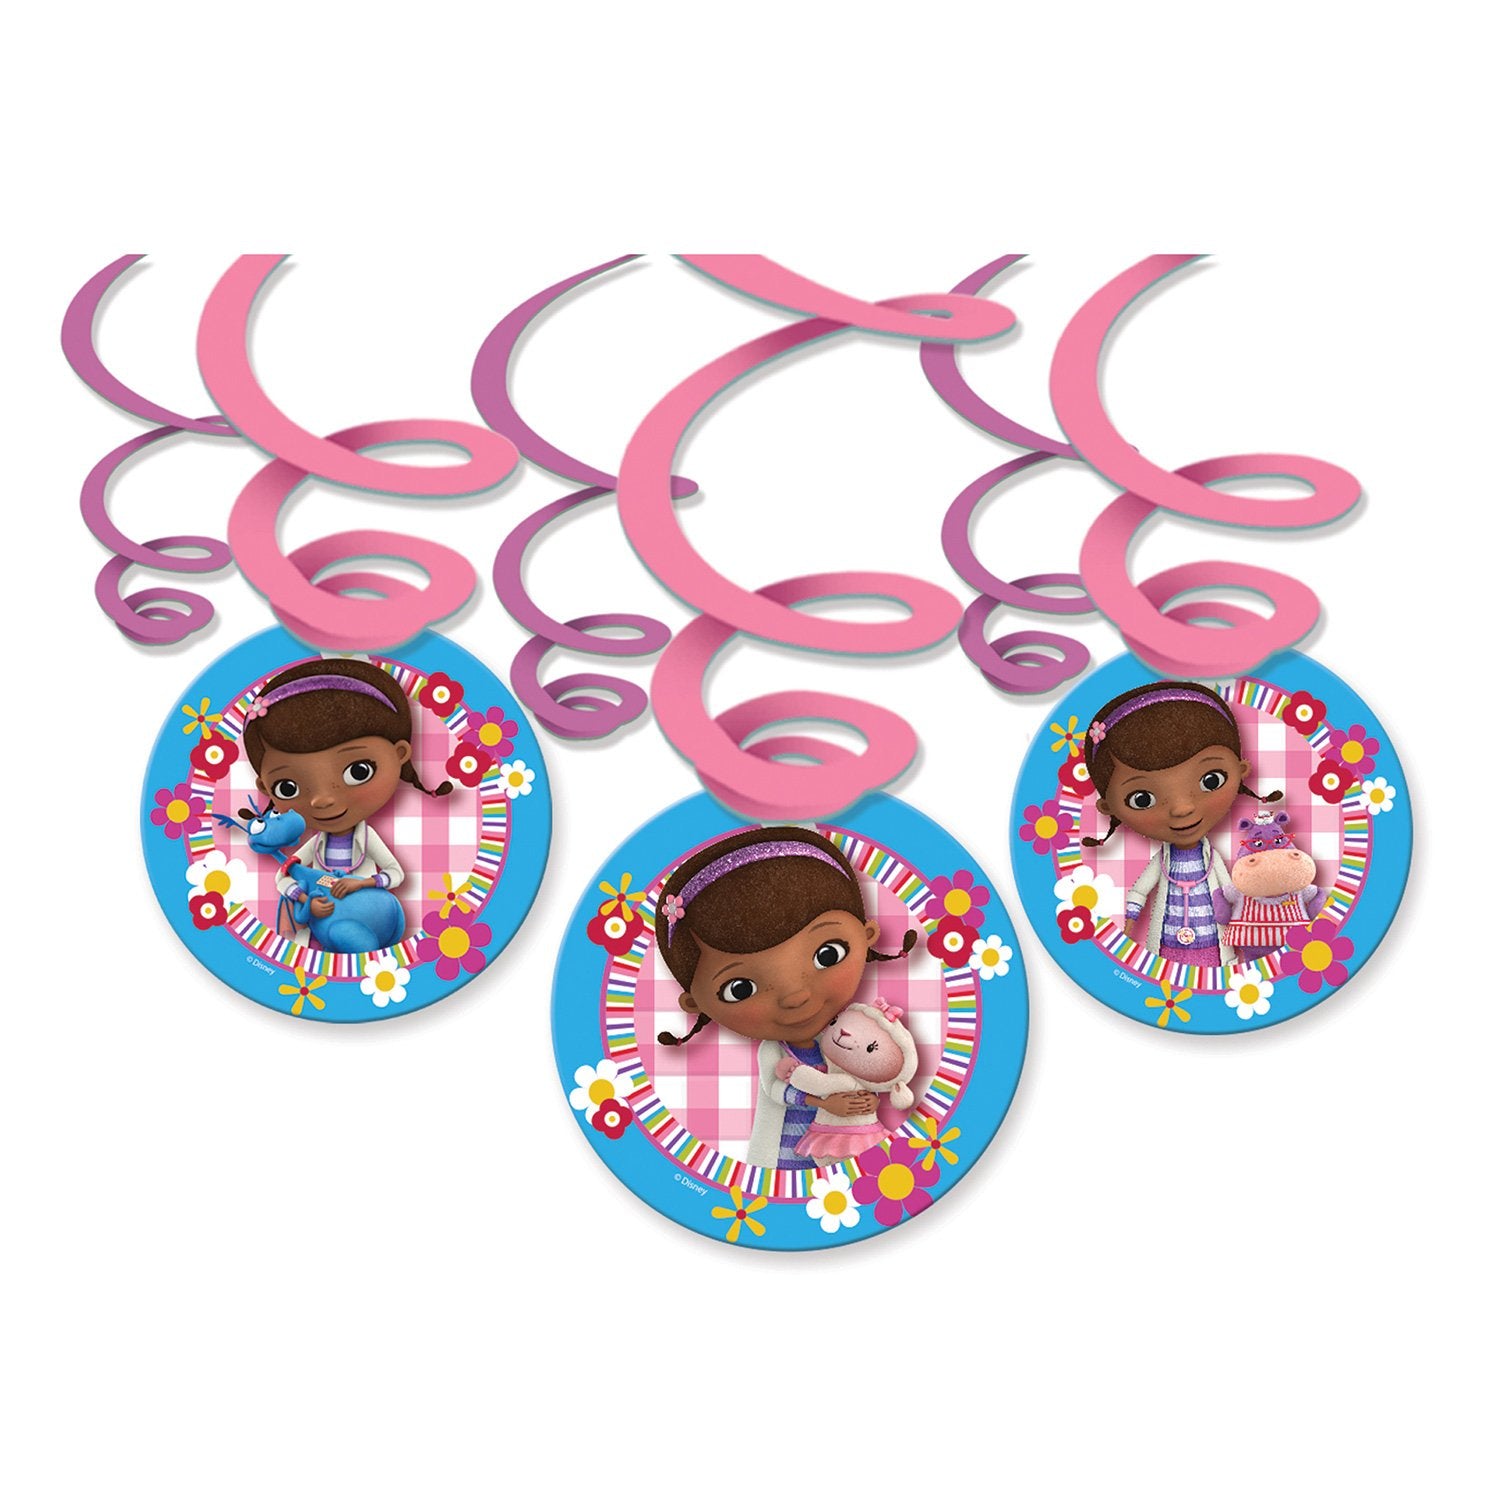 Amscan Doc McStuffins Swirl Decorations Party Accessory